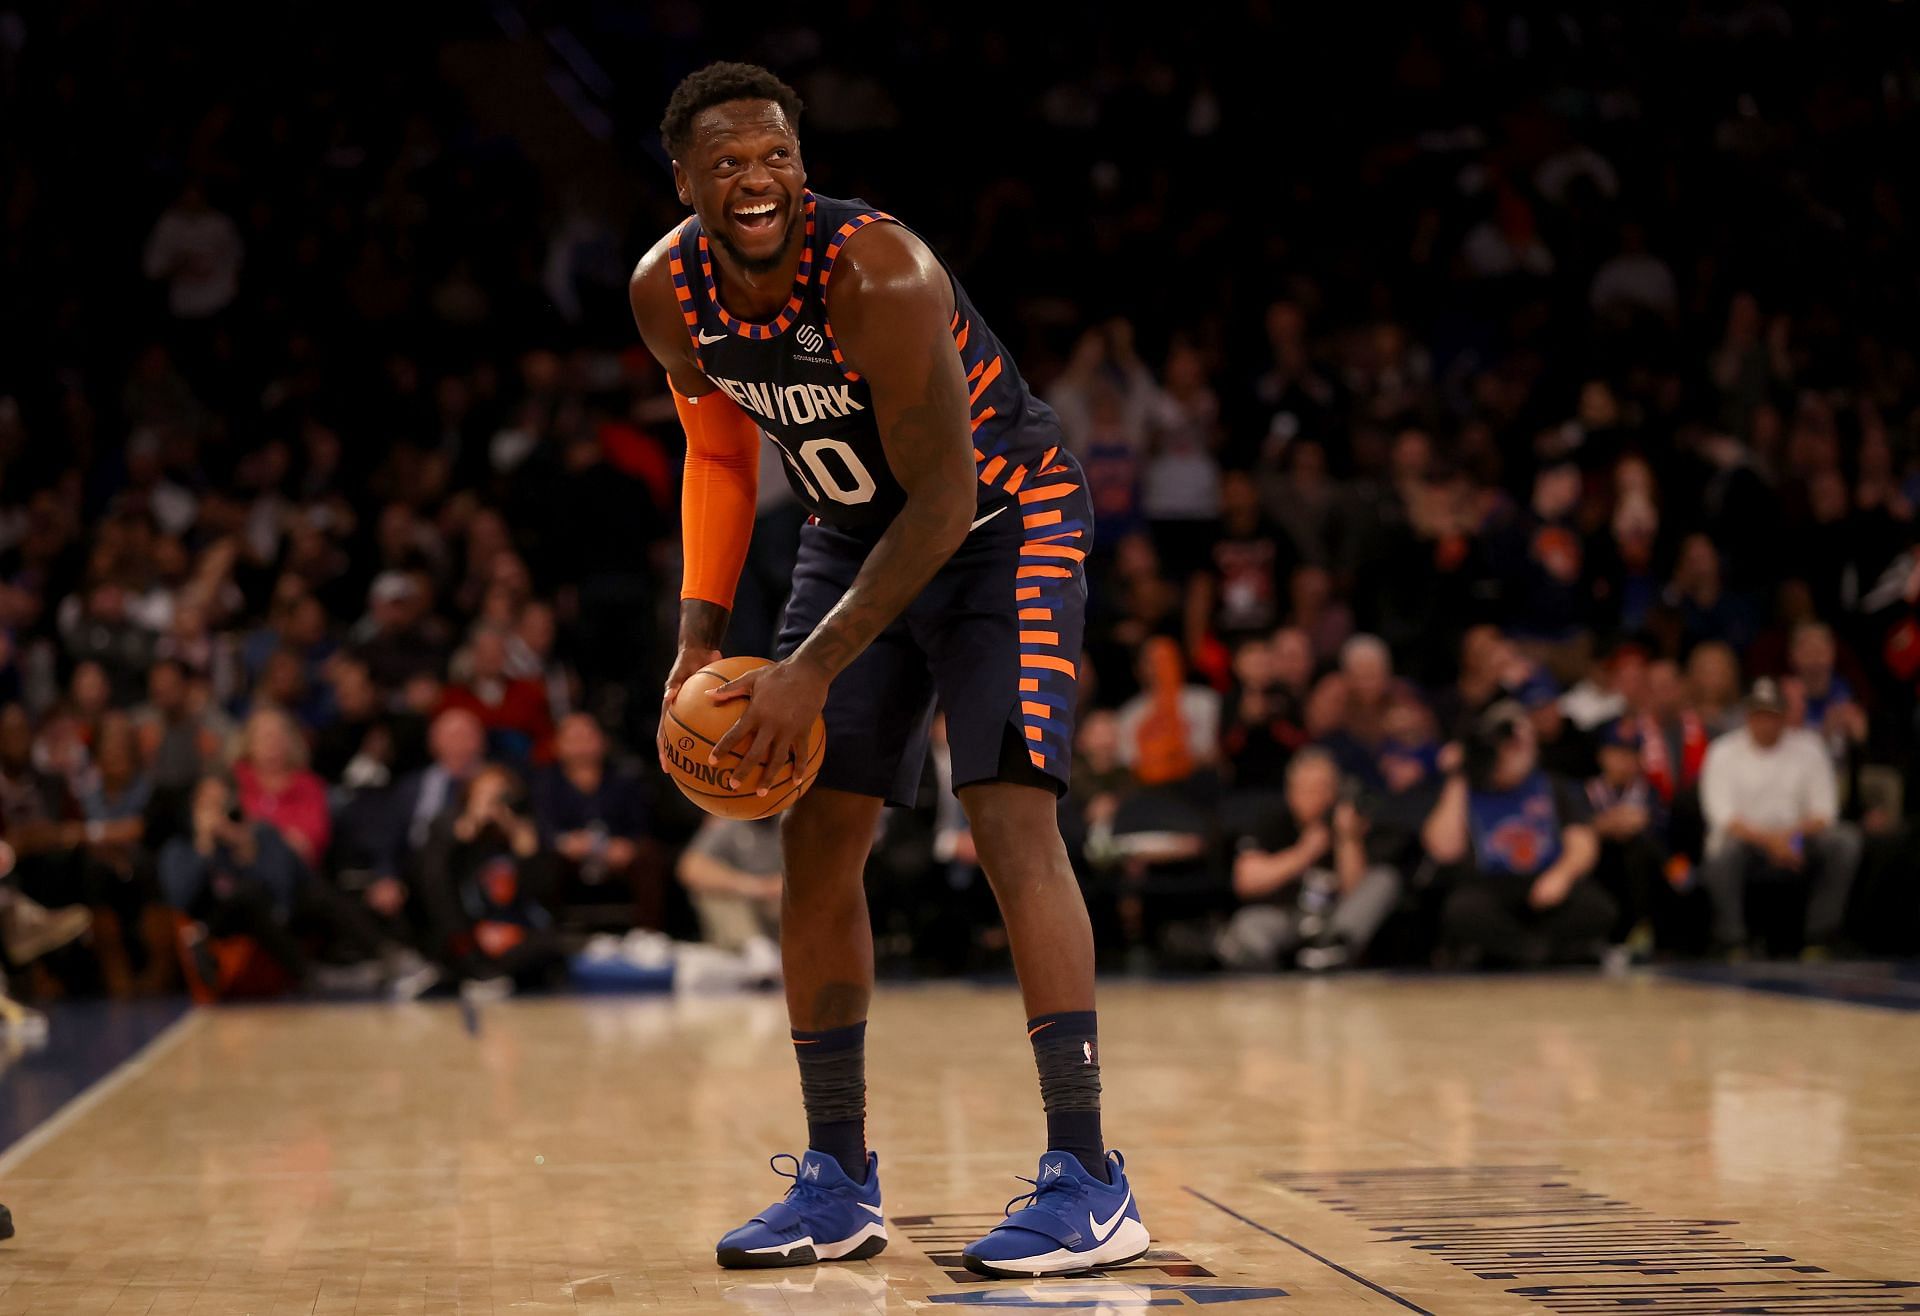 Julius Randle and the New York Knicks outmuscled the Chicago Bulls in the paint.